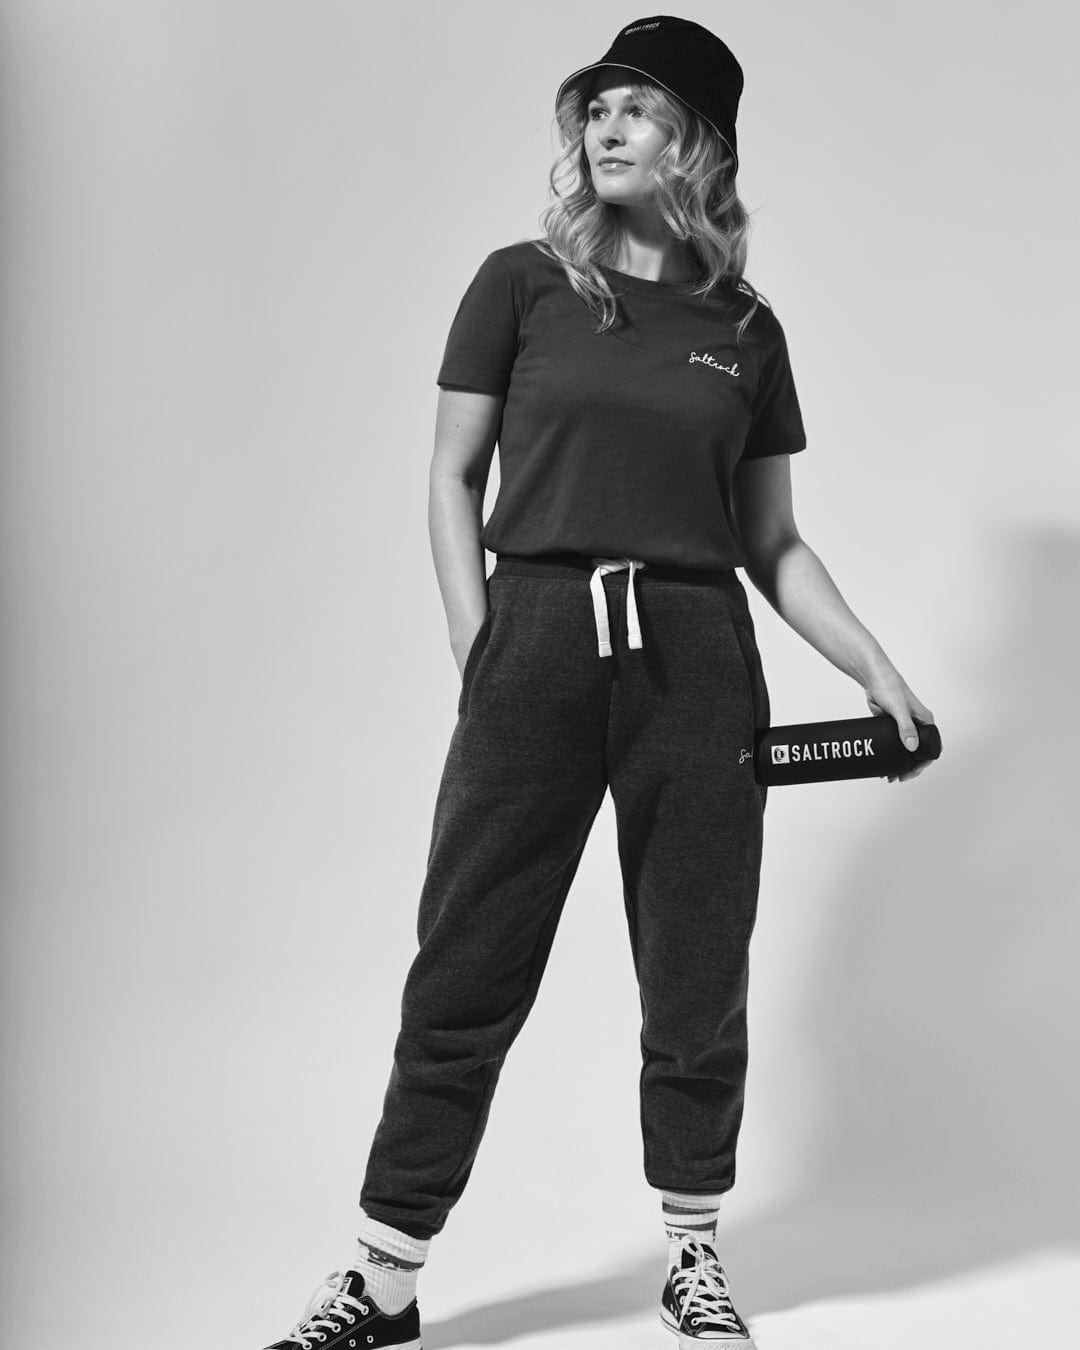 Woman in casual attire with Saltrock Velator joggers in Dark Grey, cap, and clutch bag posing for a monochrome fashion photograph.